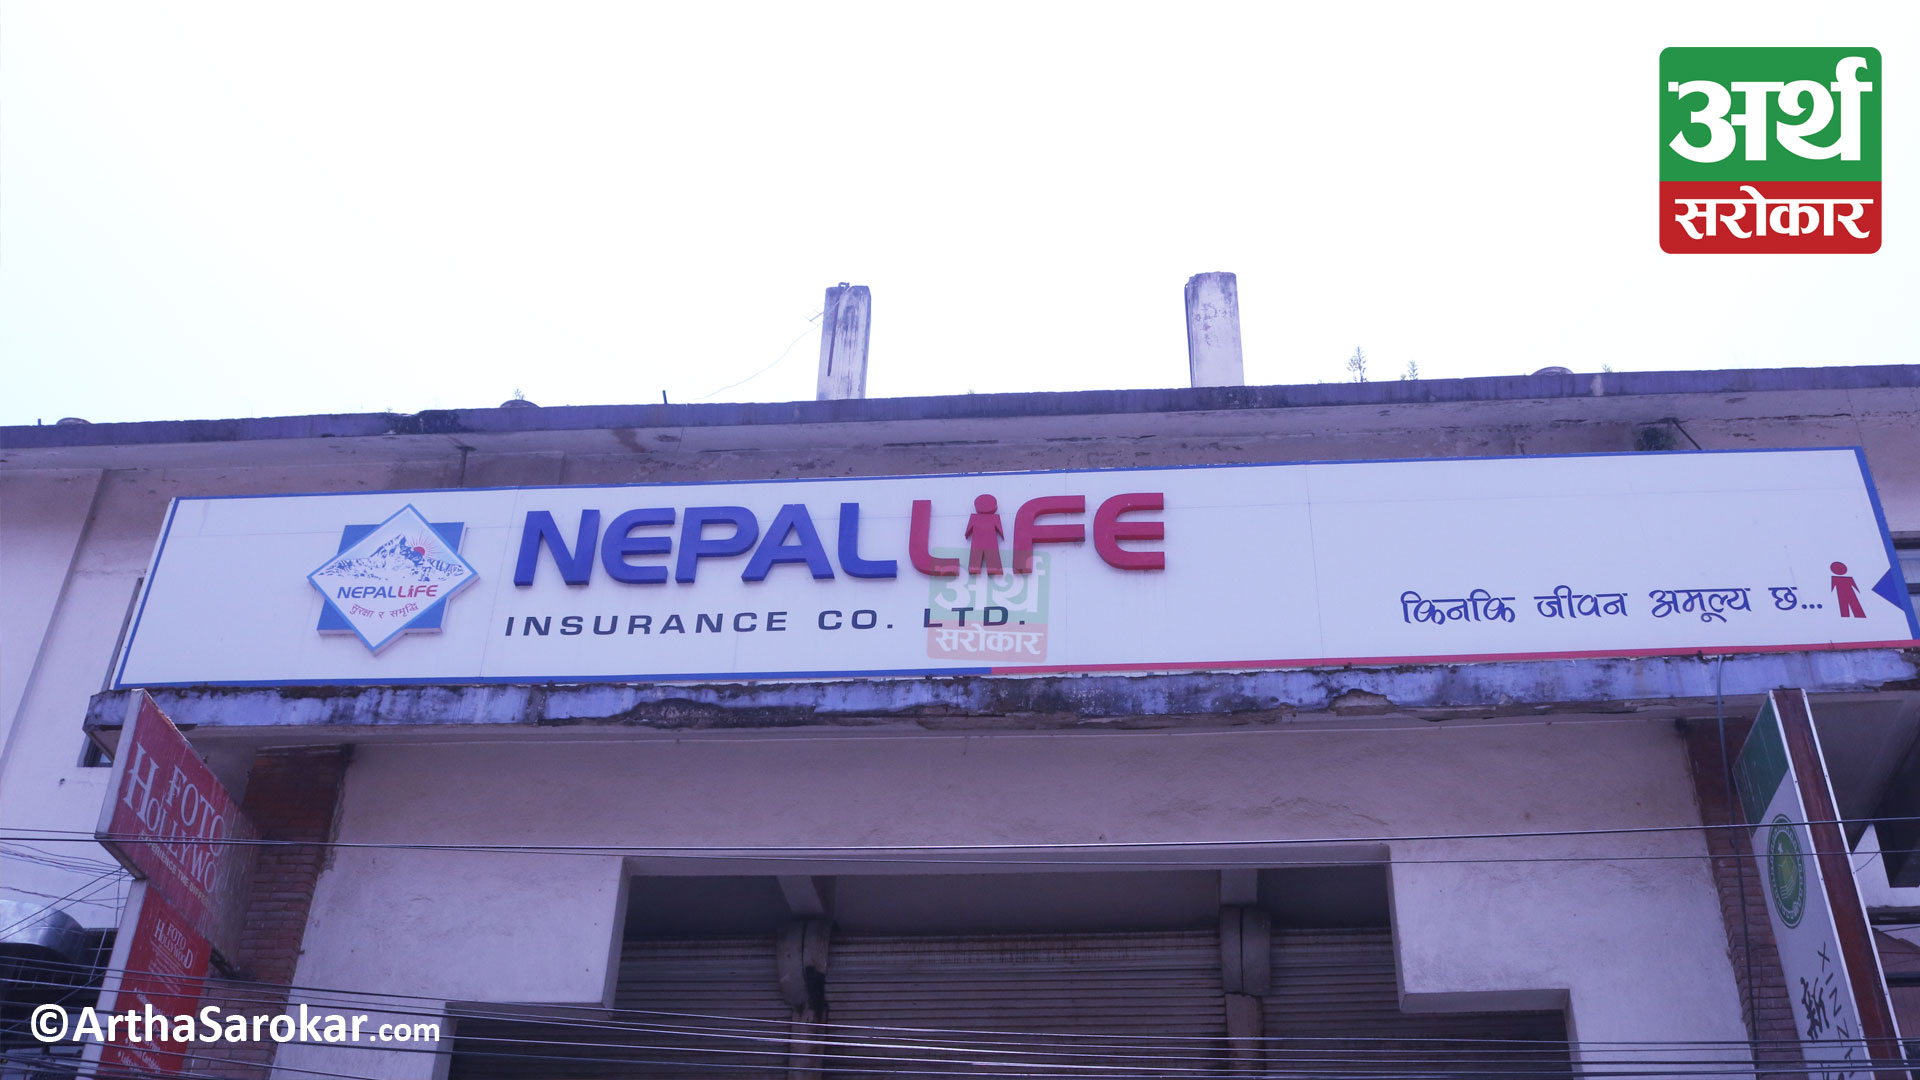 Nepal Life Insurance is to give  51% dividend to their shareholders